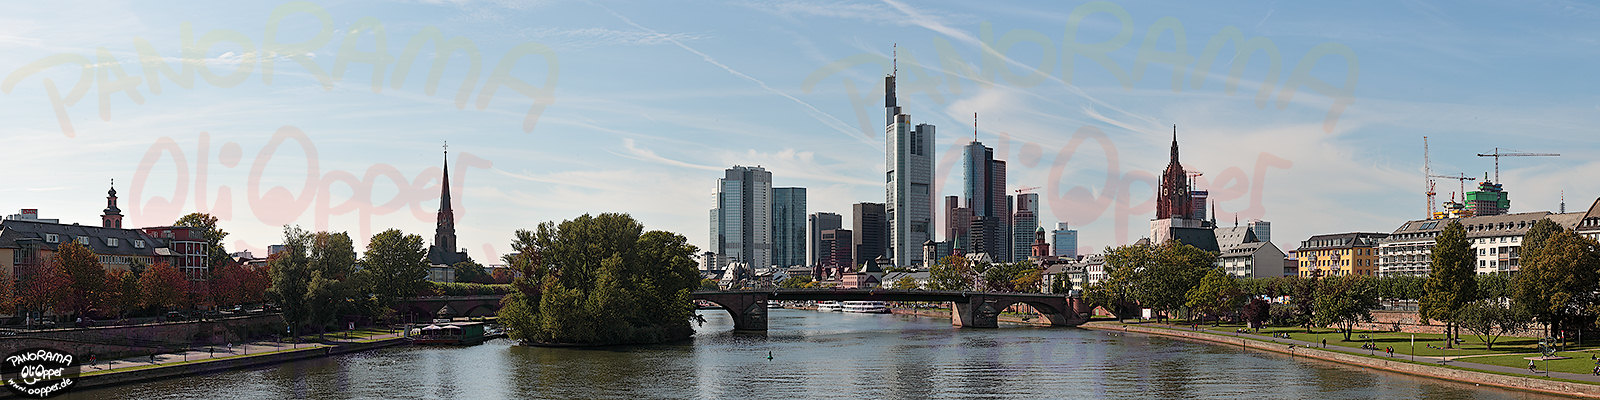 Panorama Frankfurt - Skyline am Tag - p298 - (c) by Oliver Opper